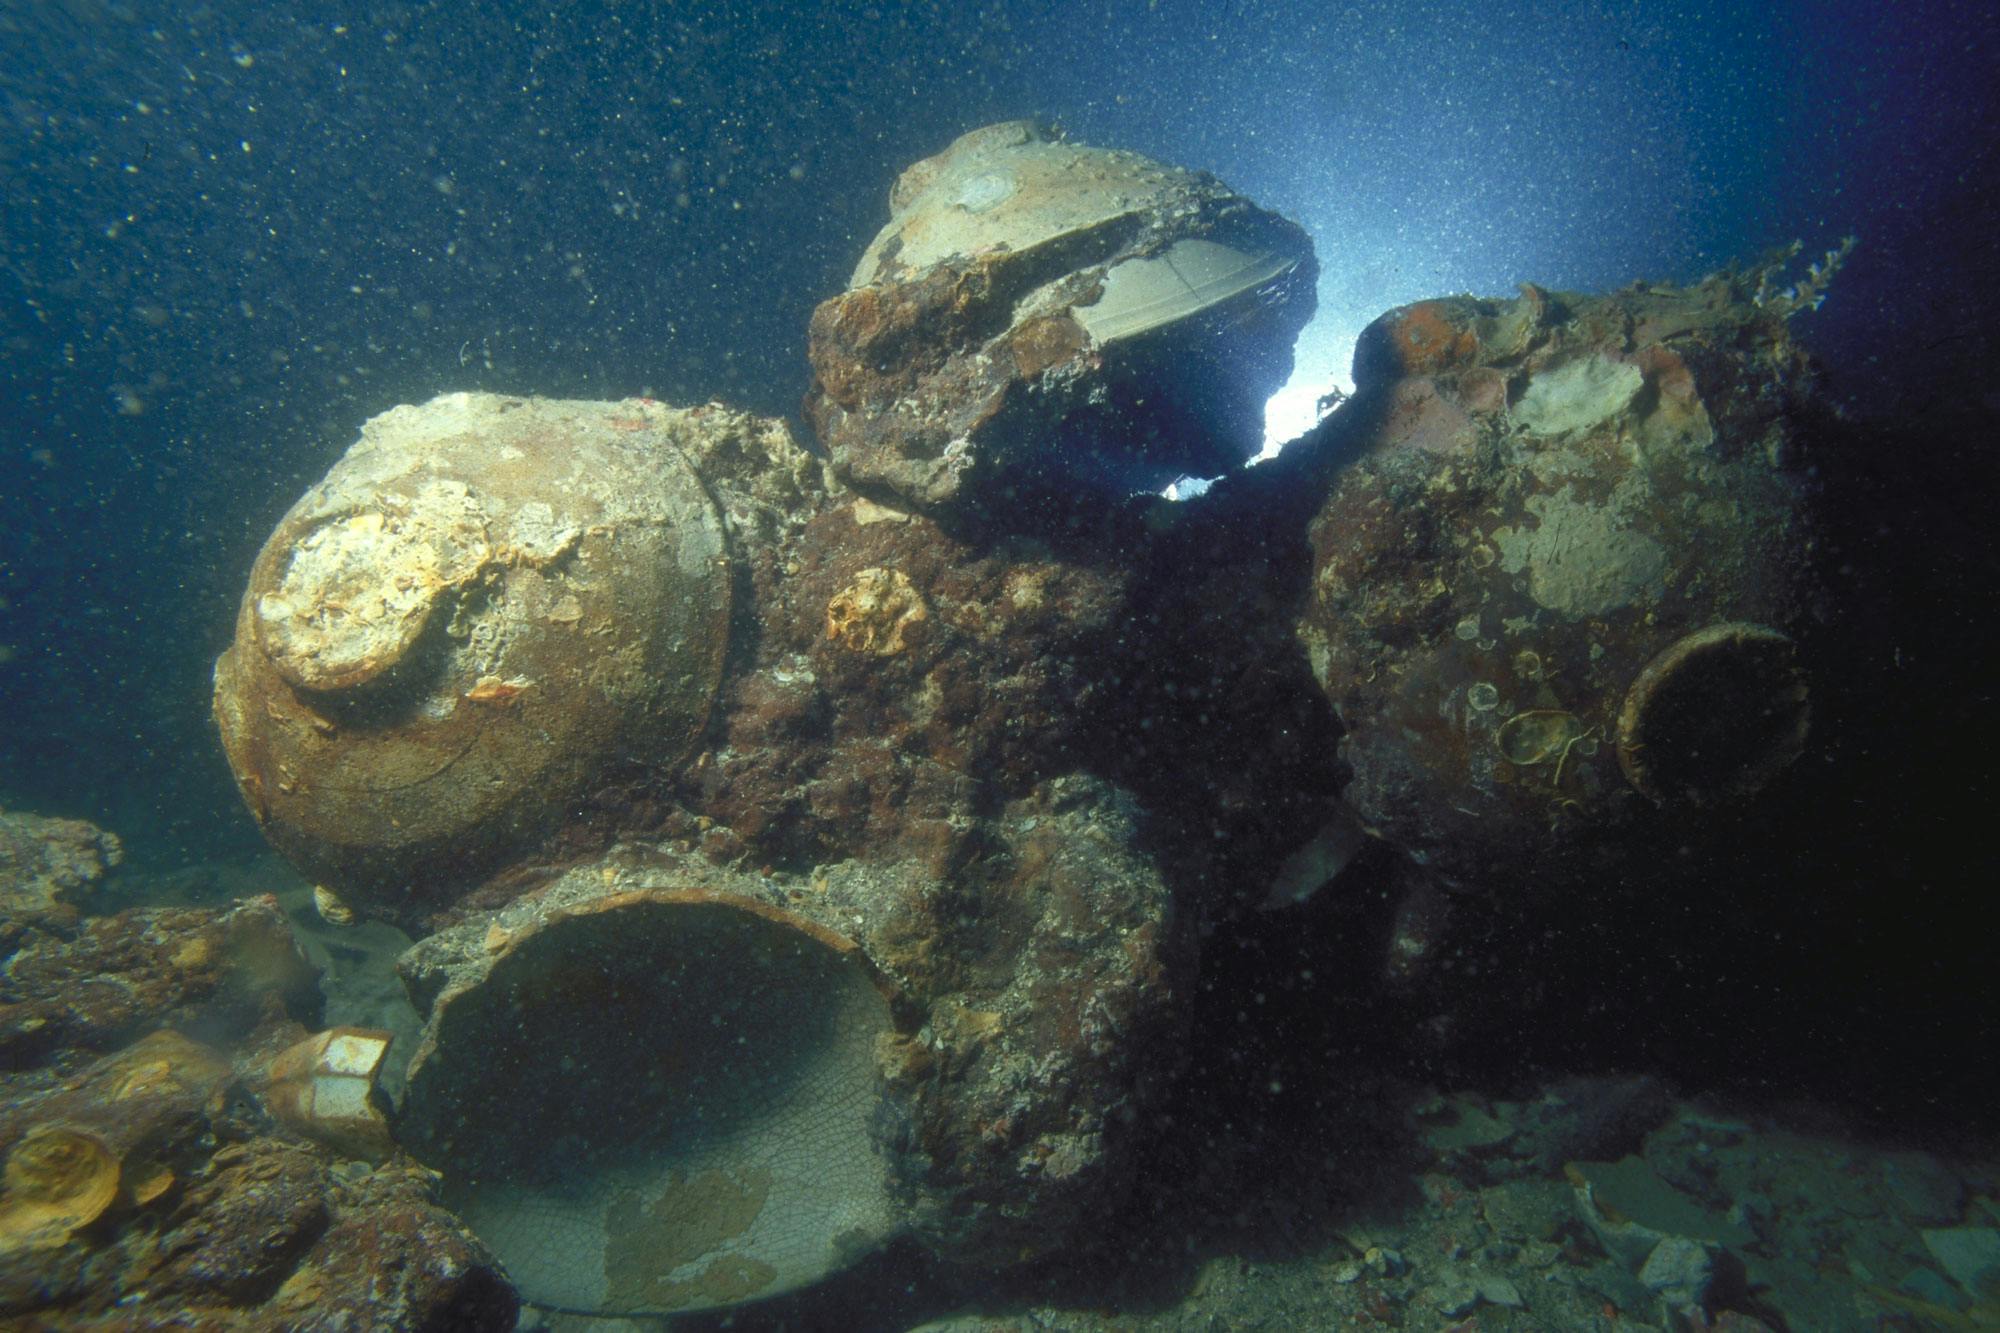 Several ceramic bowls rest on the seafloor, stuck together along with corroded iron and remnants of sea life.